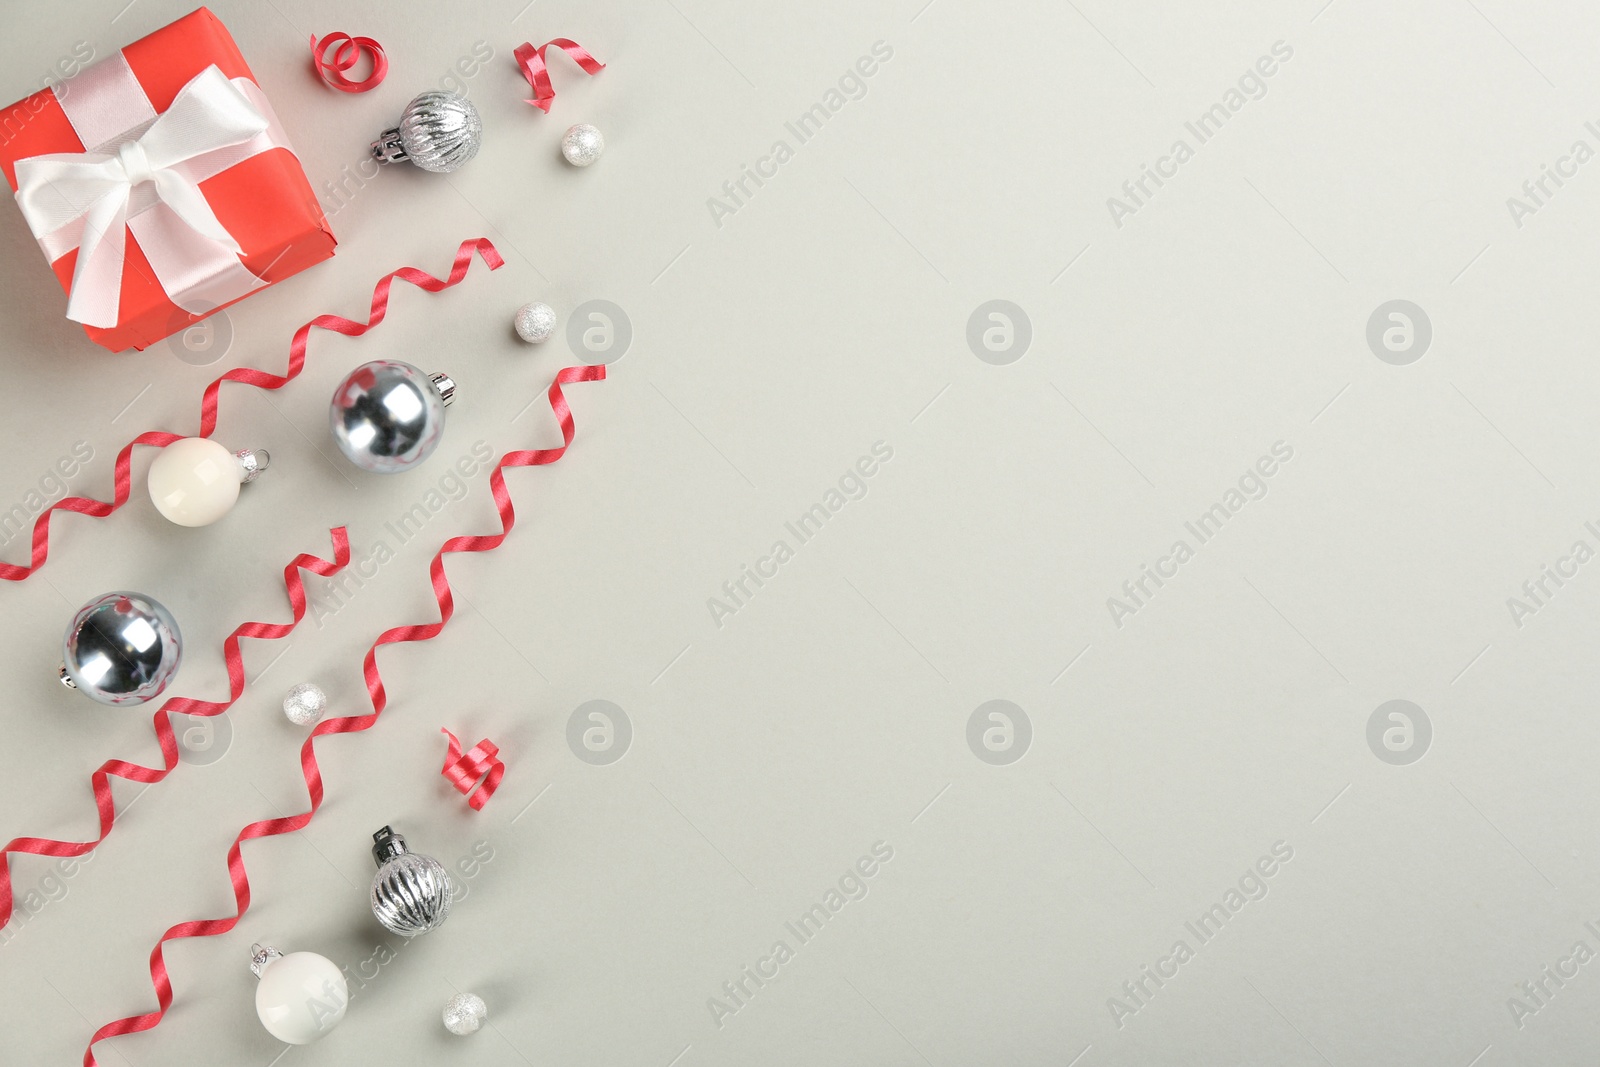 Photo of Red serpentine streamers, Christmas balls and gift box on light grey background, flat lay. Space for text